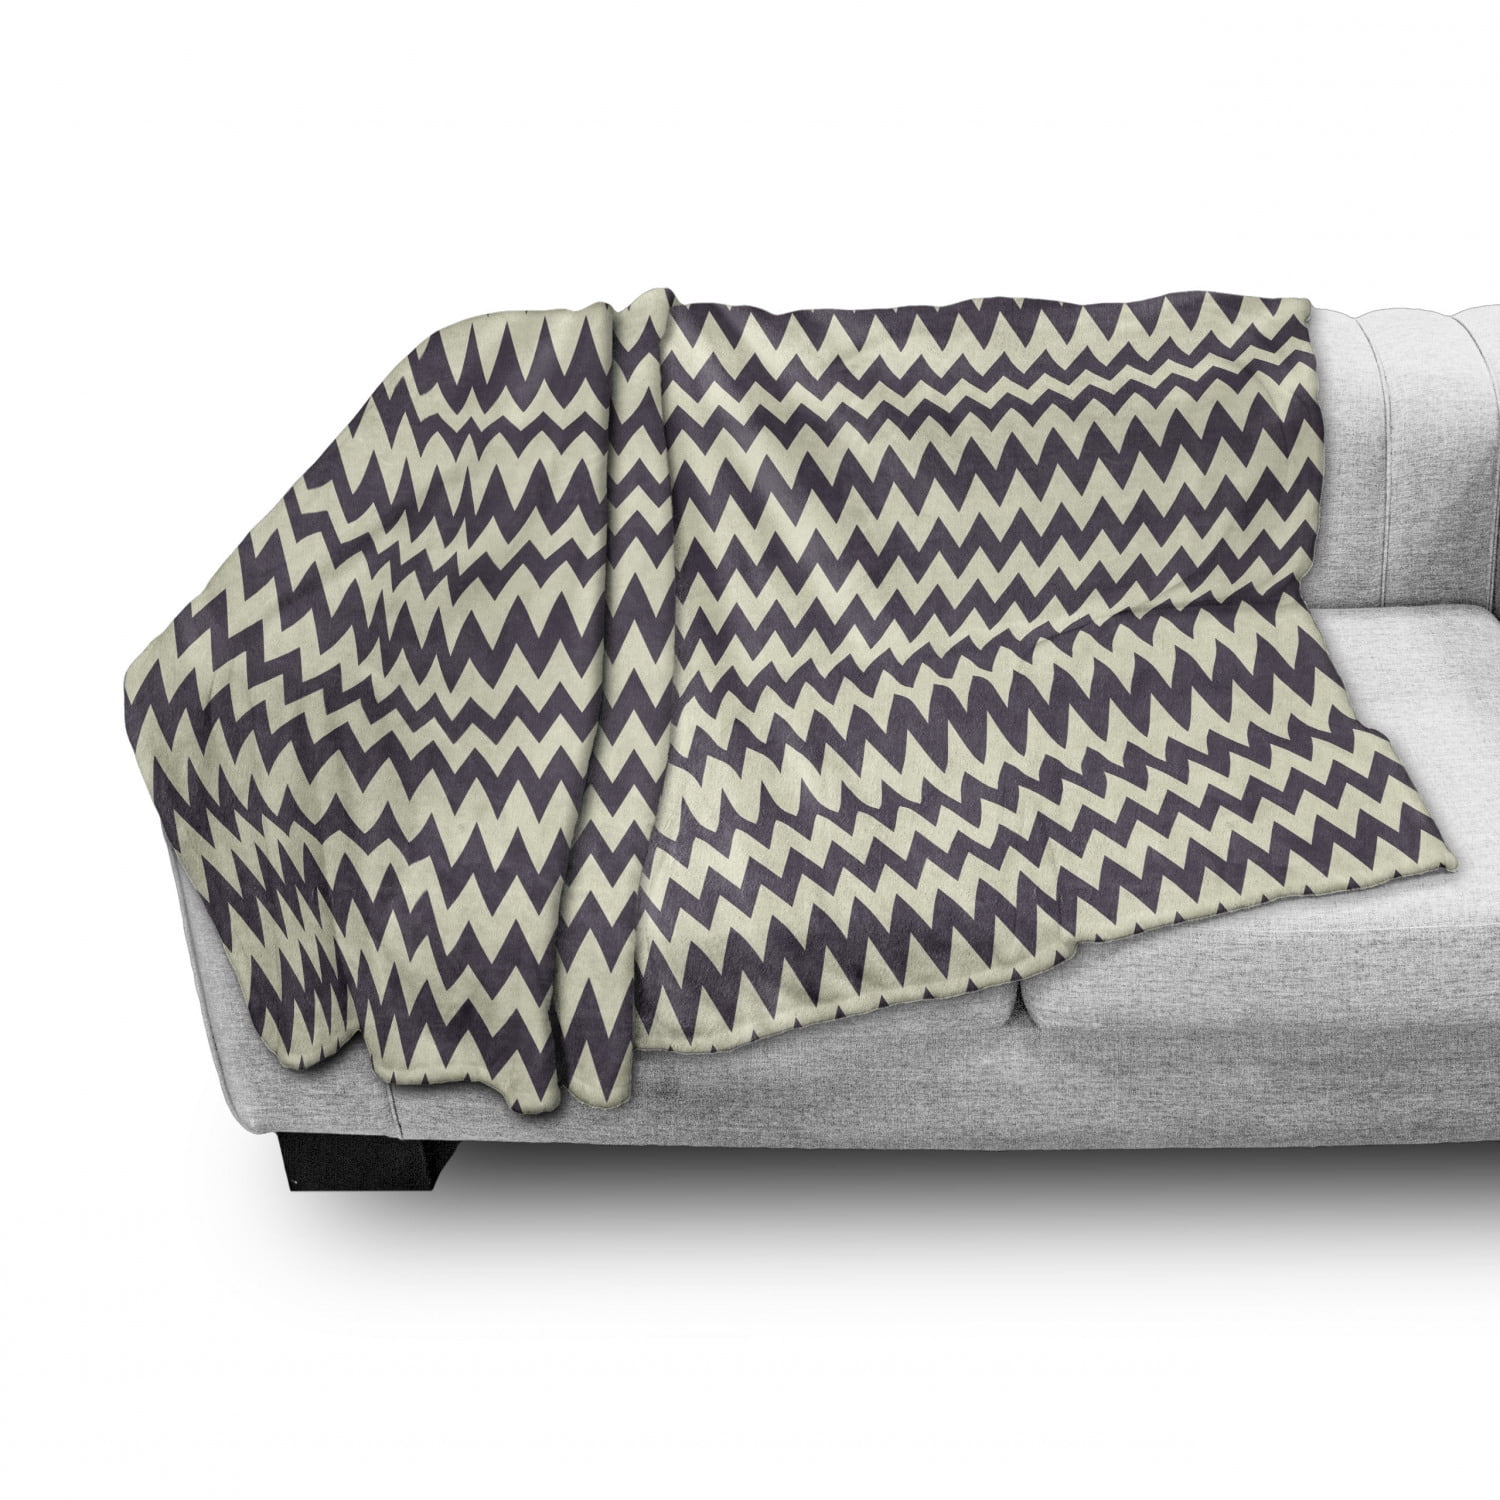 Dark Blue Cream Flannel Fleece Accent Piece Soft Couch Cover for Adults 50 x 60 Ambesonne Chevron Throw Blanket Horizontal Narrow Sharp Edged Zig Zags Classical Simplistic with Retro Effects